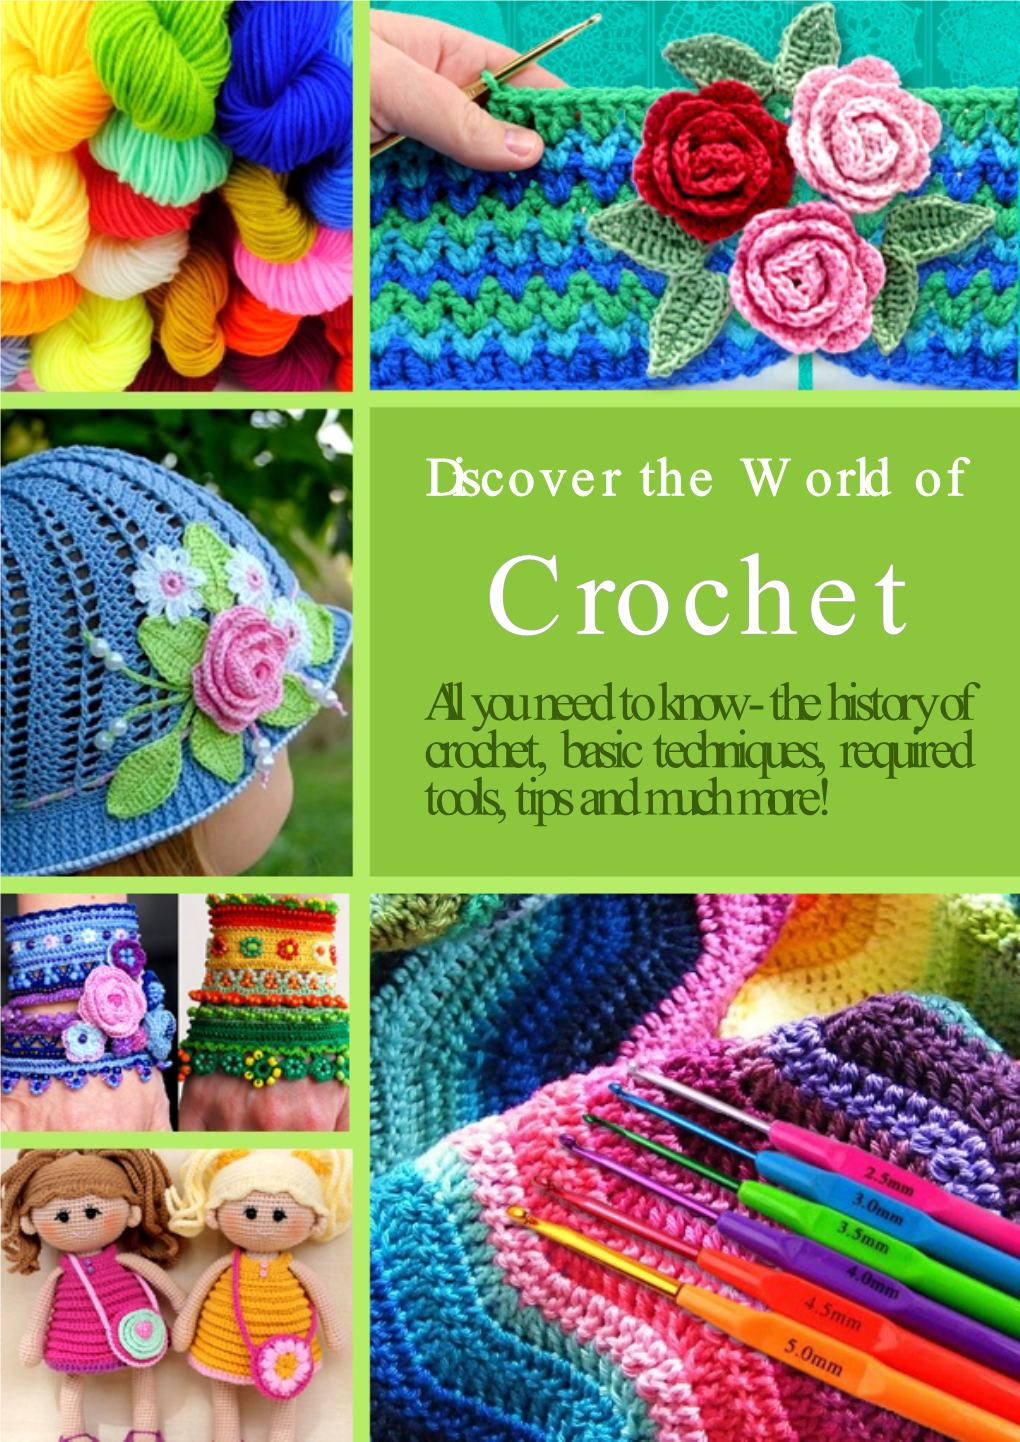 Crochet All You Need to Know - the History of Crochet, Basic Techniques, Required Tools, Tips and Much More! TABLE of CONTENTS